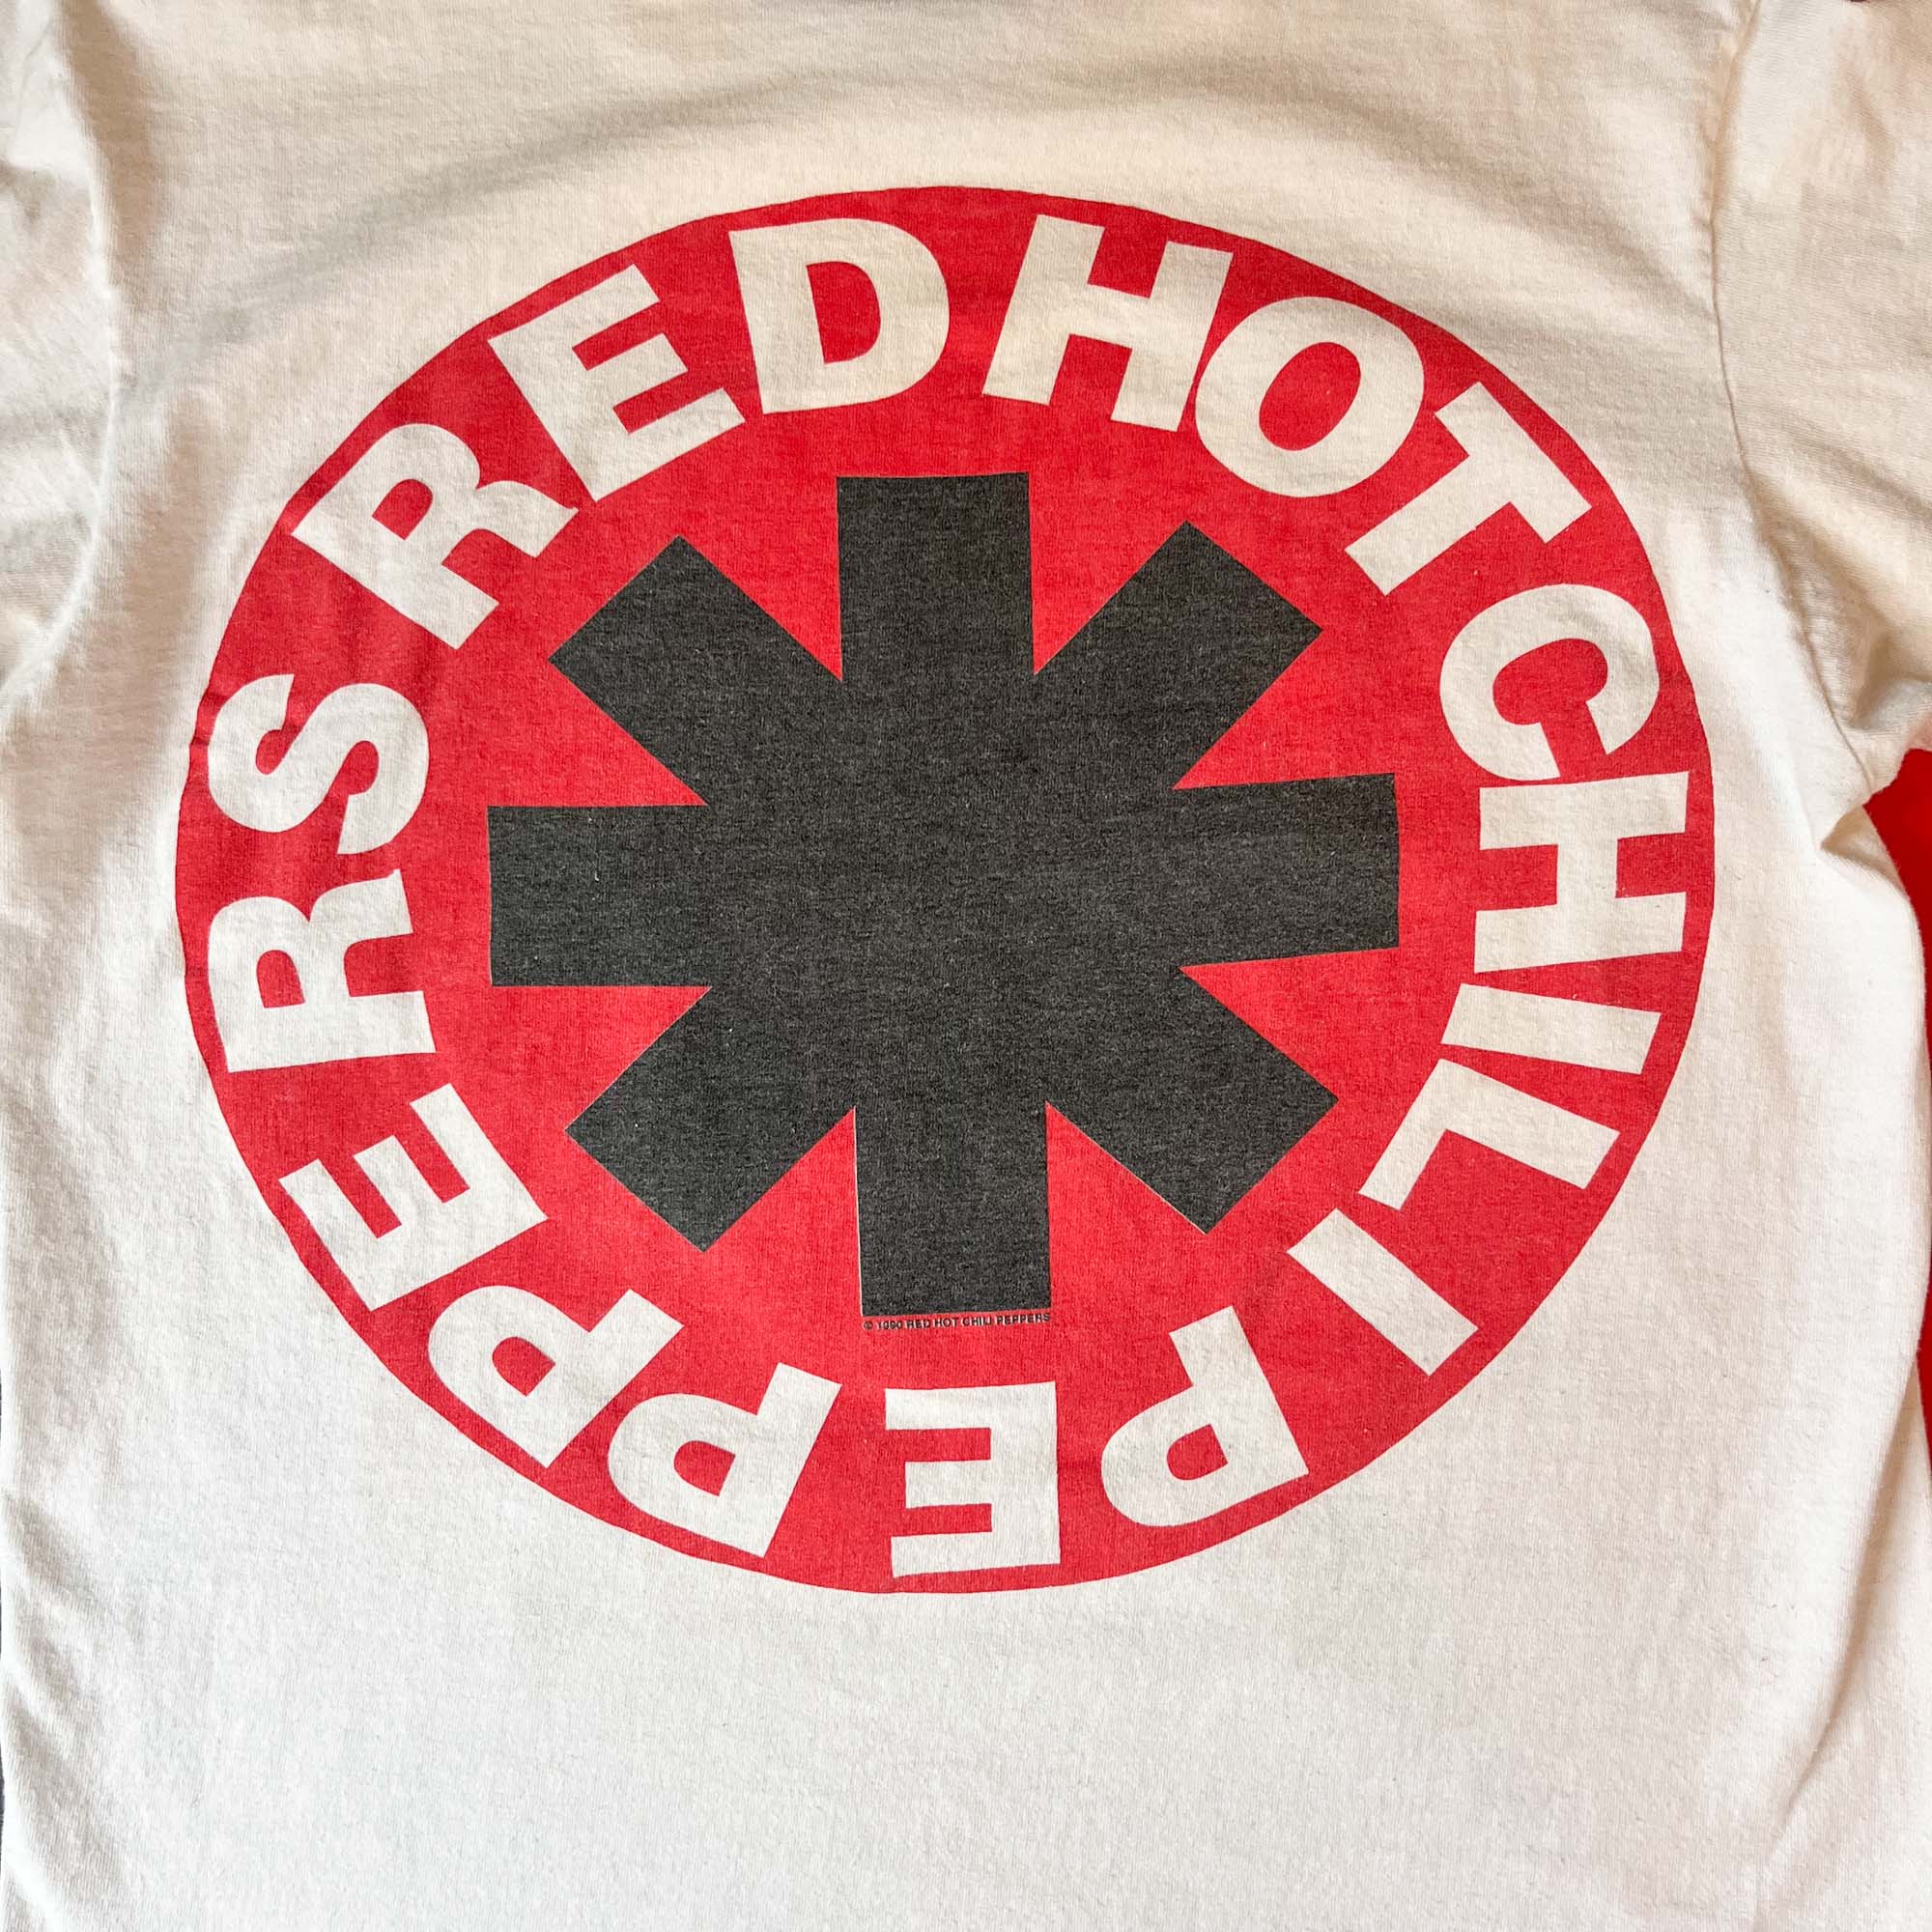 vintage Red Hot Chili Peppers tshirt Large 